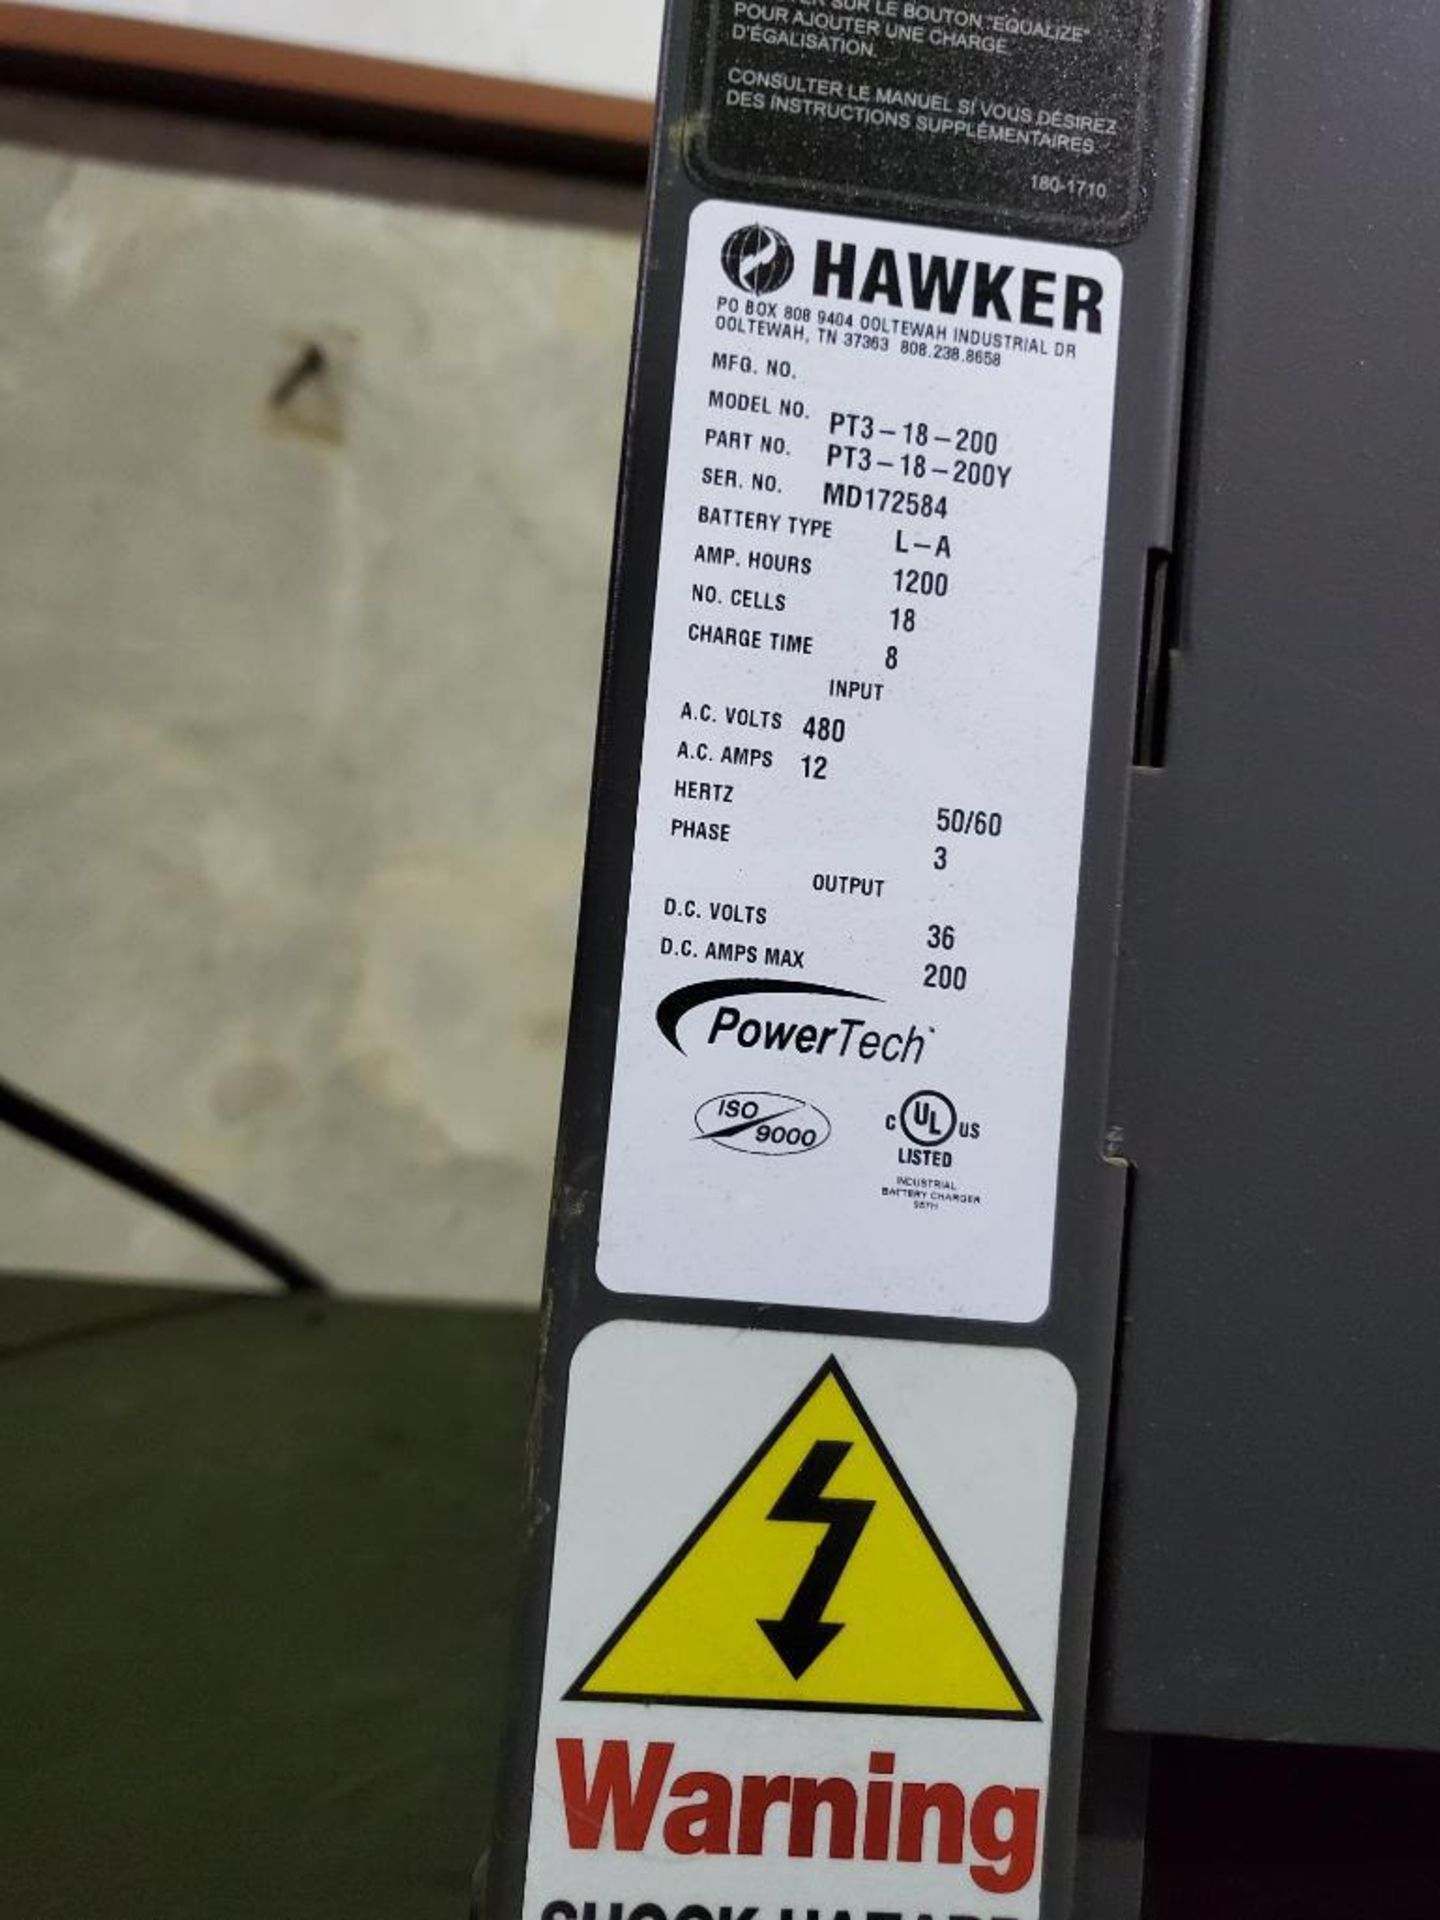 Hawker Powertech 36V Forklift Battery Charger, High Frequency Intellicharger, Model PT3-18-200, 200 - Image 3 of 3